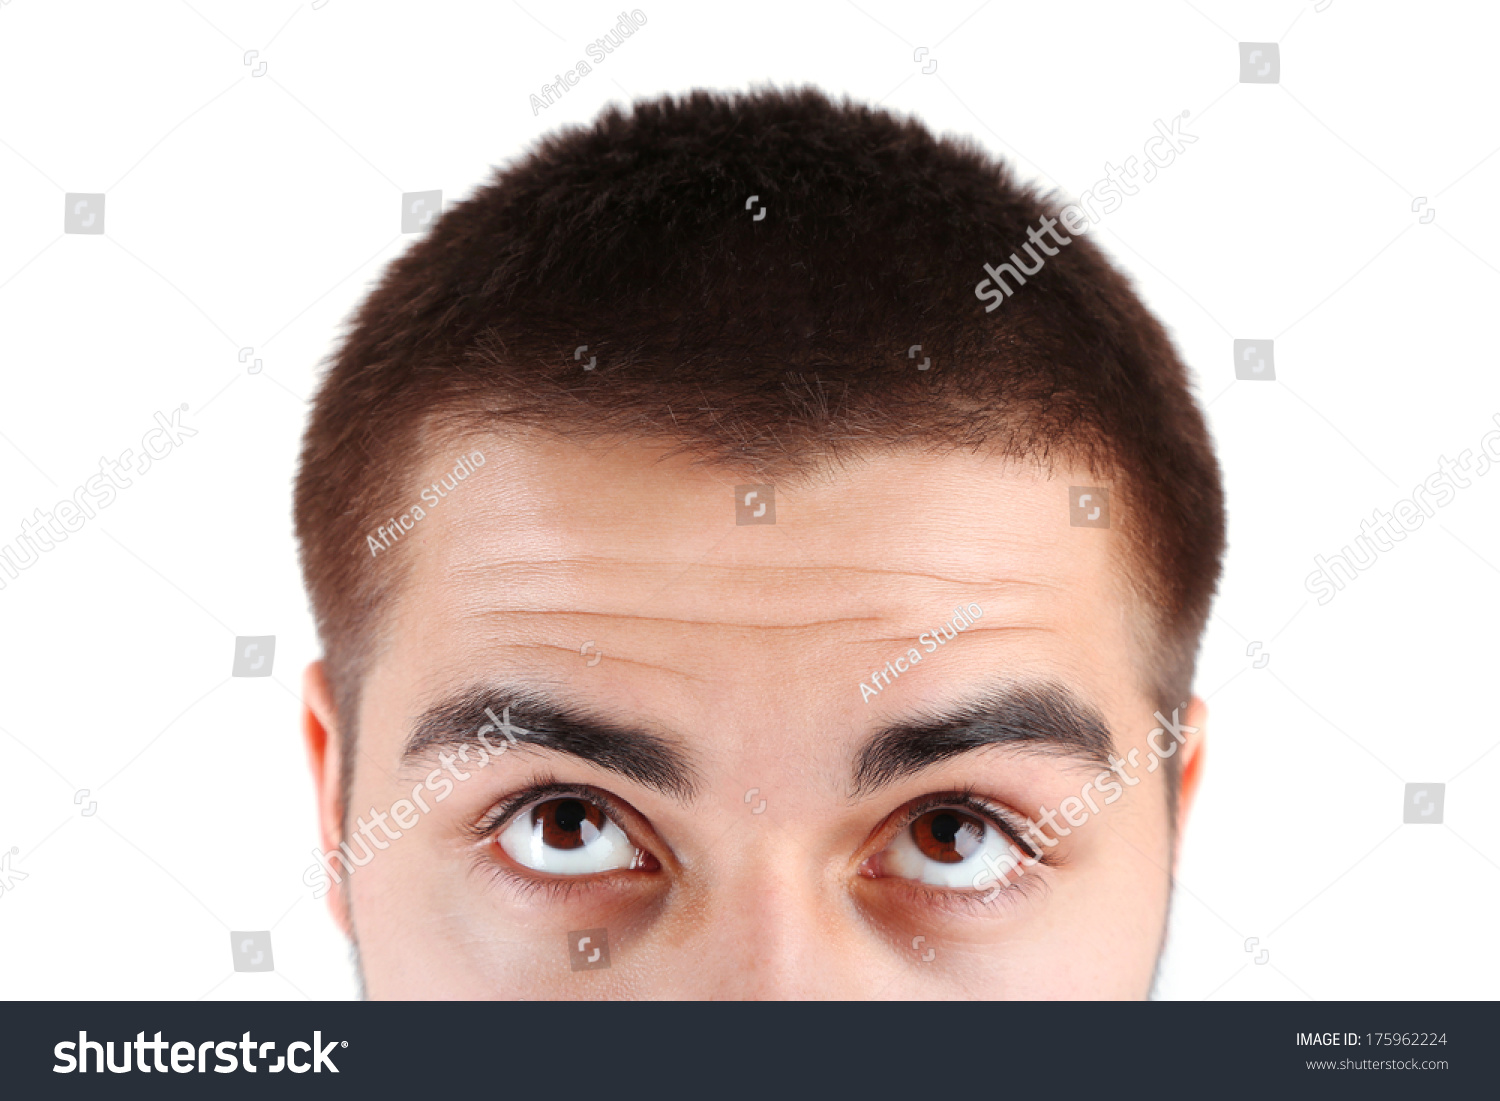 Eyes of young man on light background #175962224